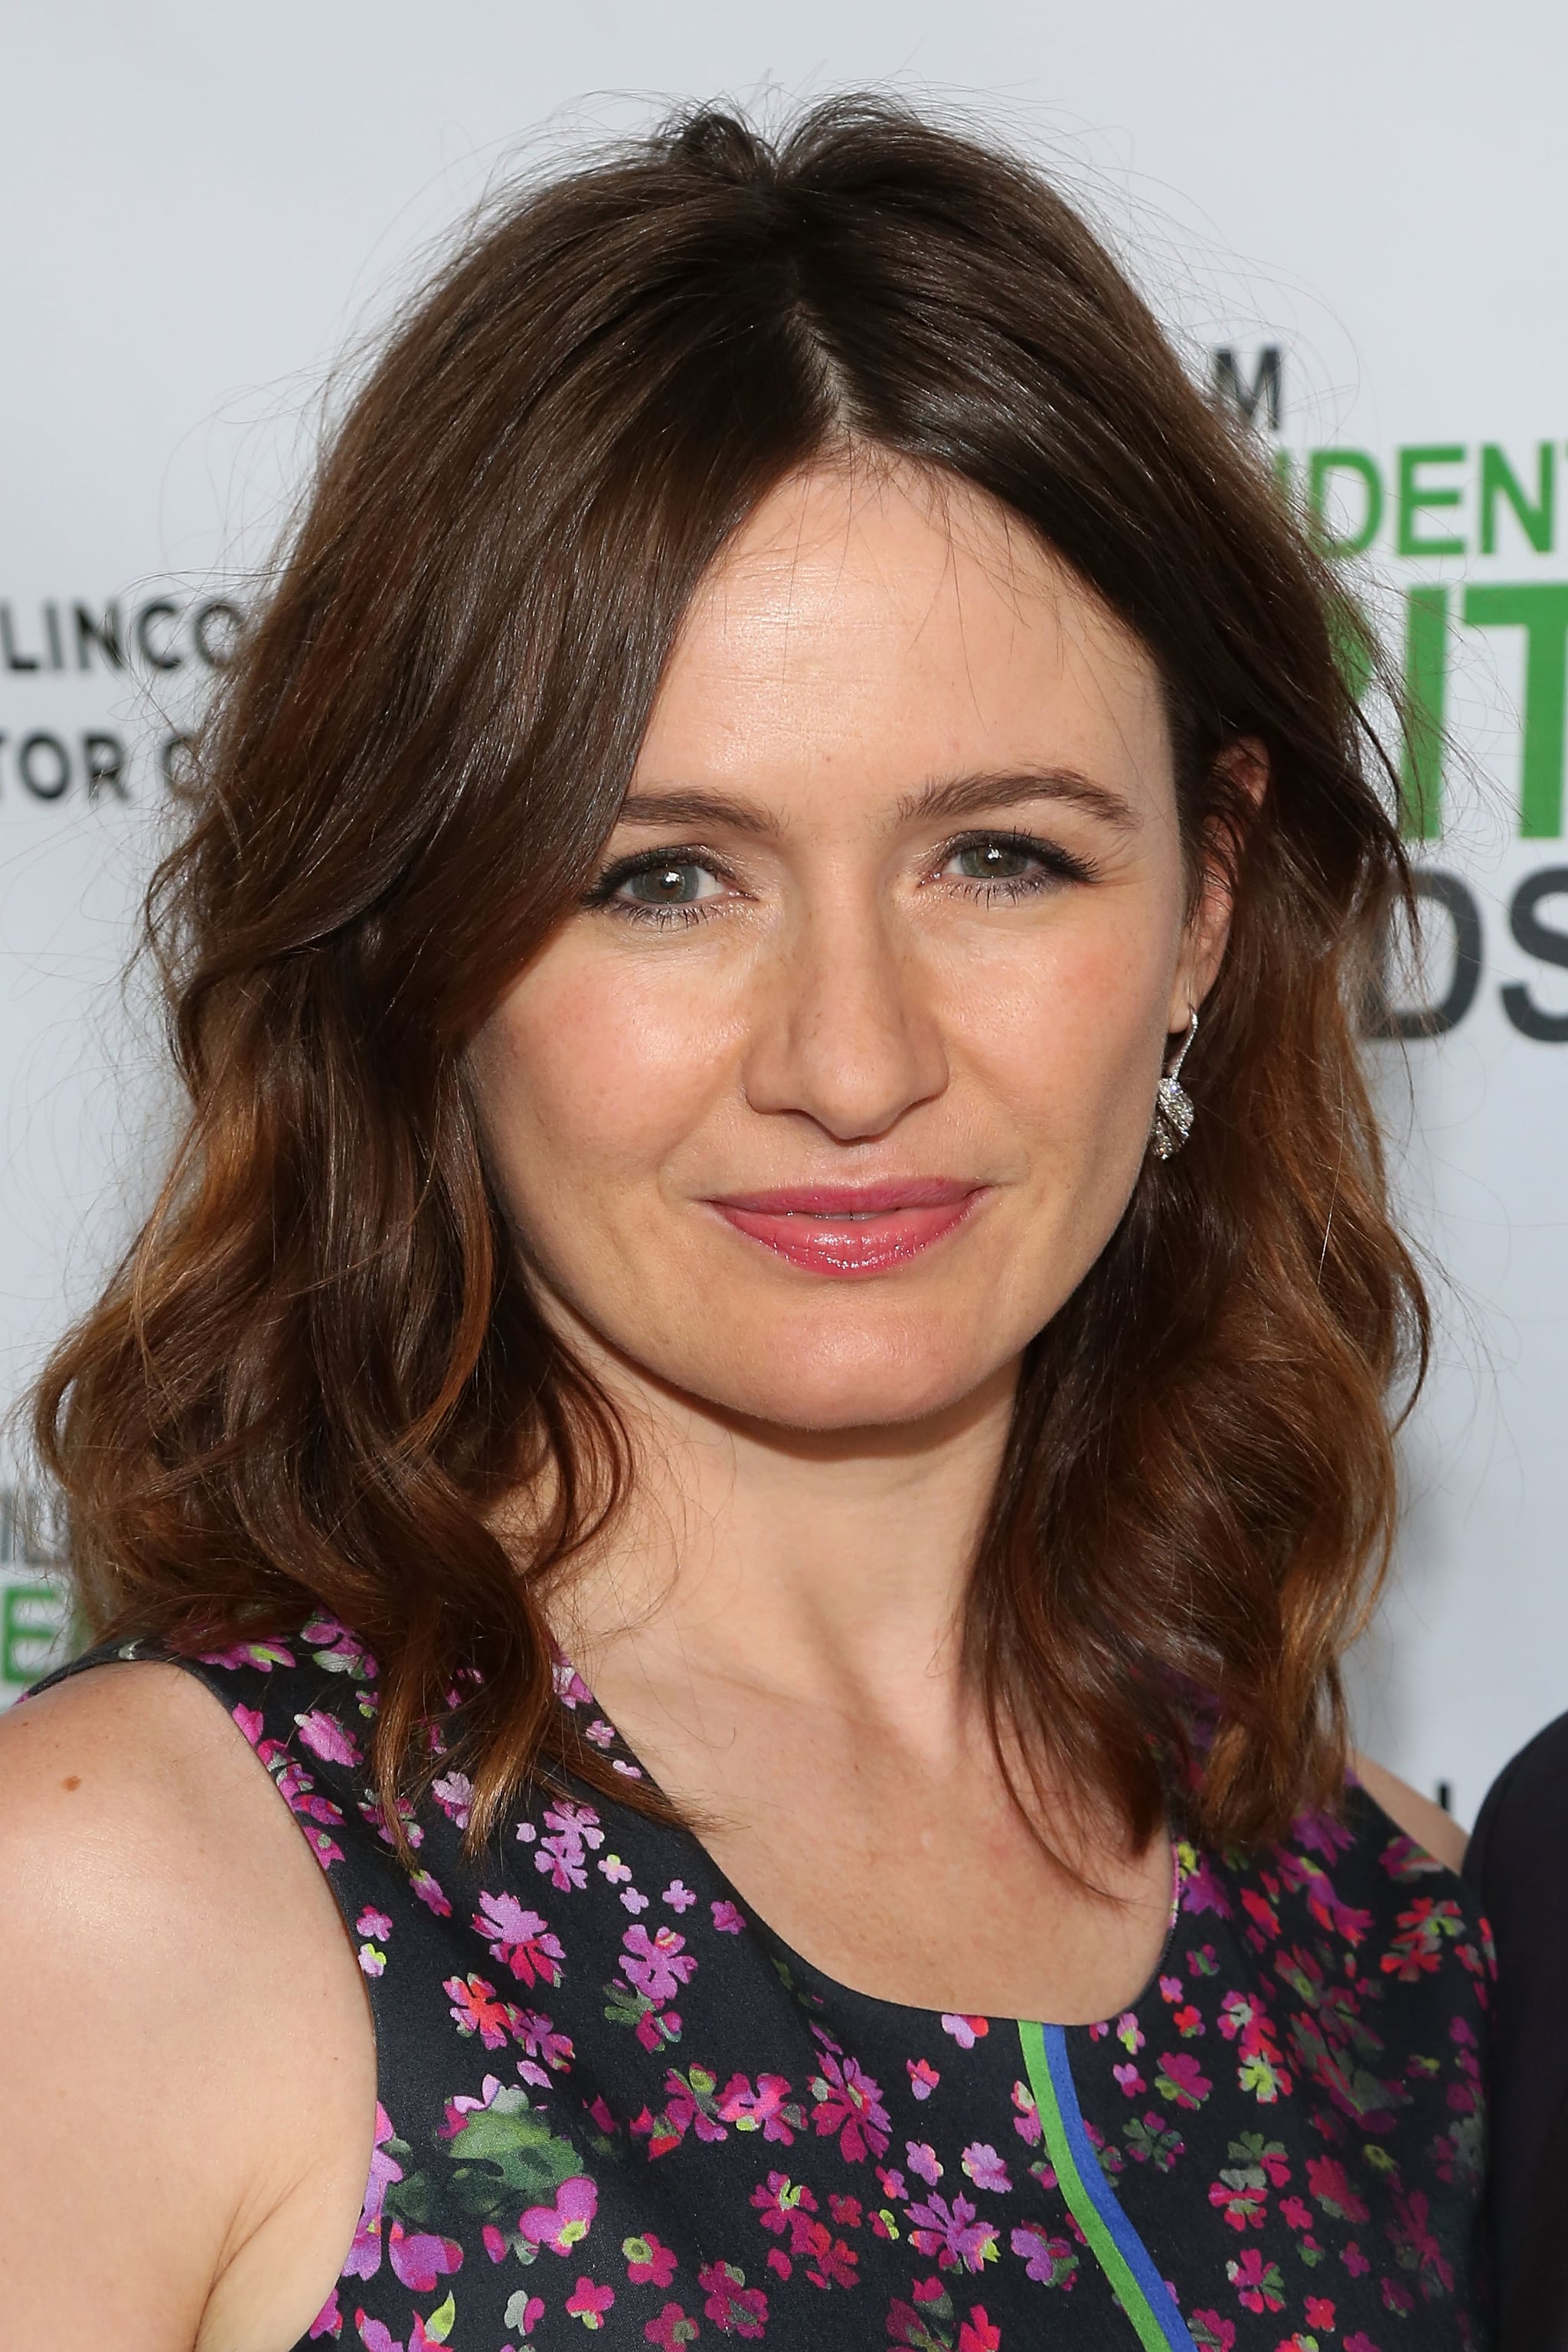 How tall is Emily Mortimer?